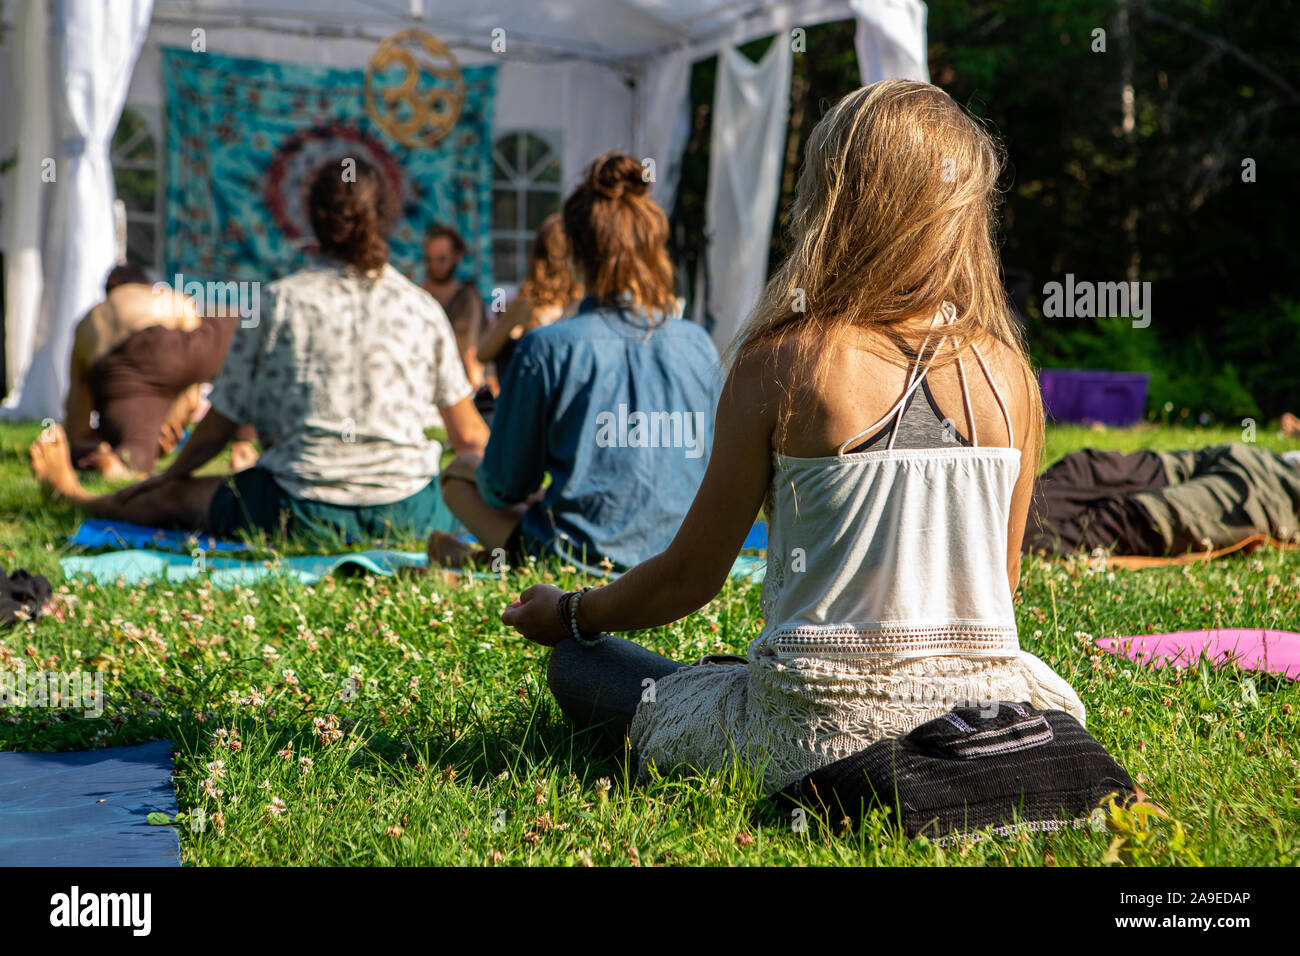 back view of blonde girl with a diverse group of people enjoying outdoor meditation session during a woodland spiritual gathering Stock Photo